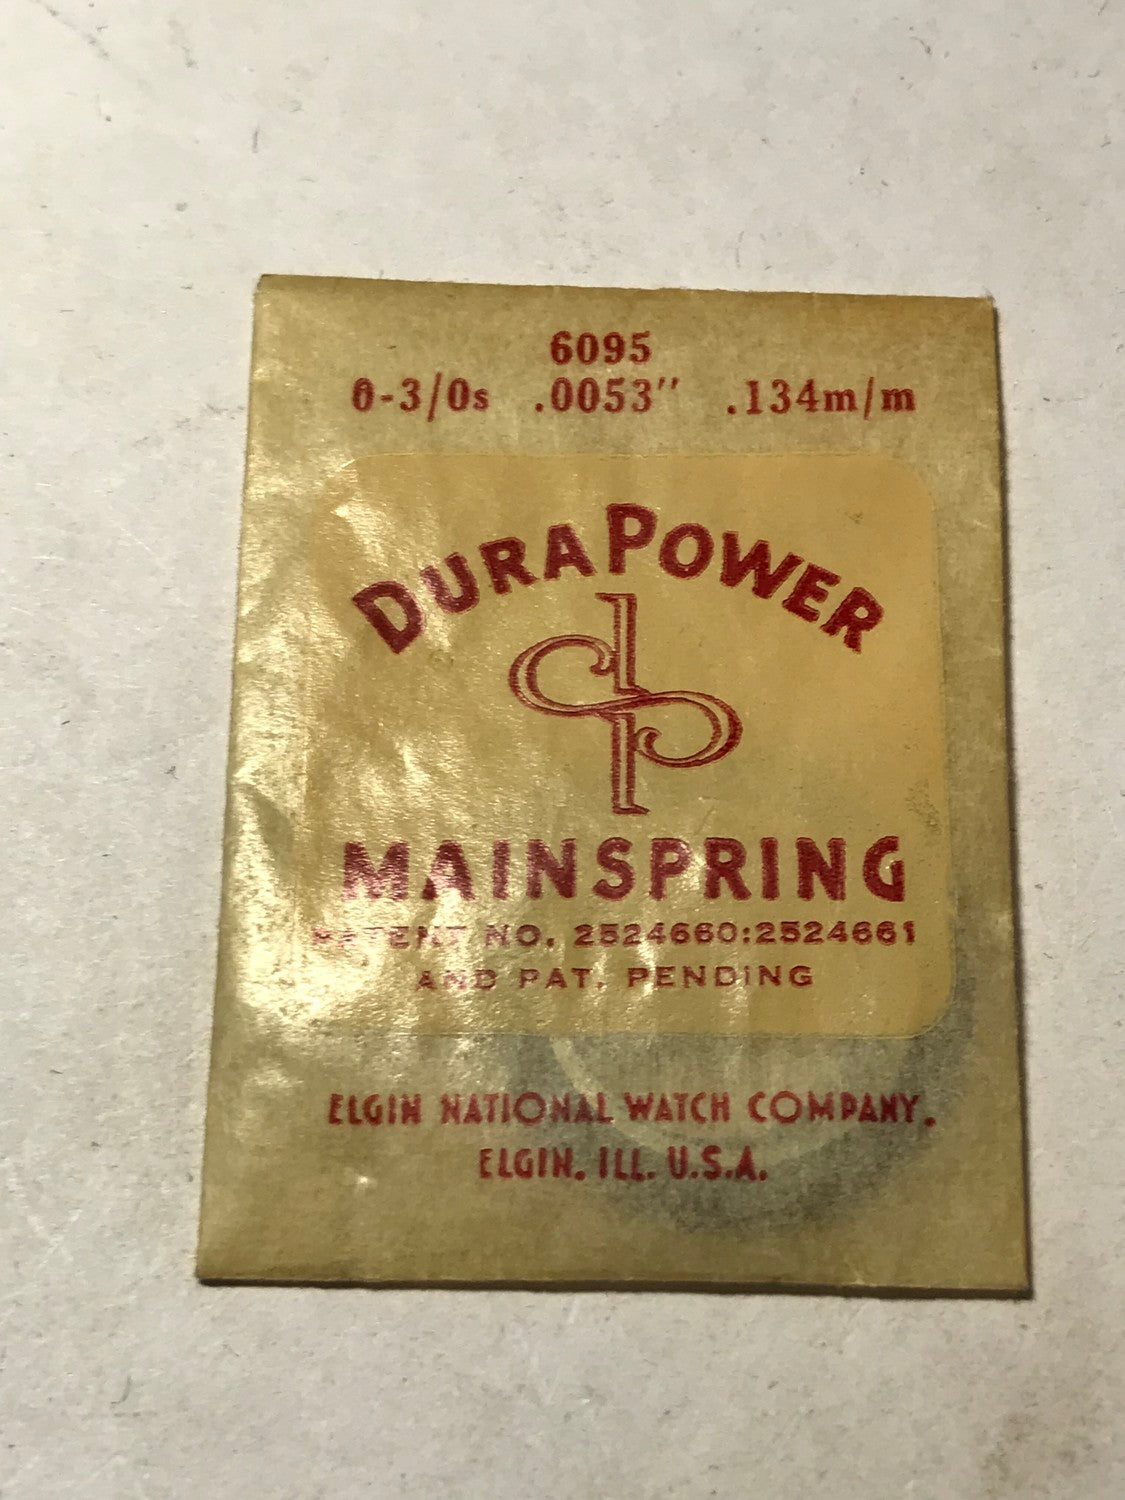 Elgin DuraPower Factory Mainspring for 0s & 3/0s 2097 / 6095 - Alloy